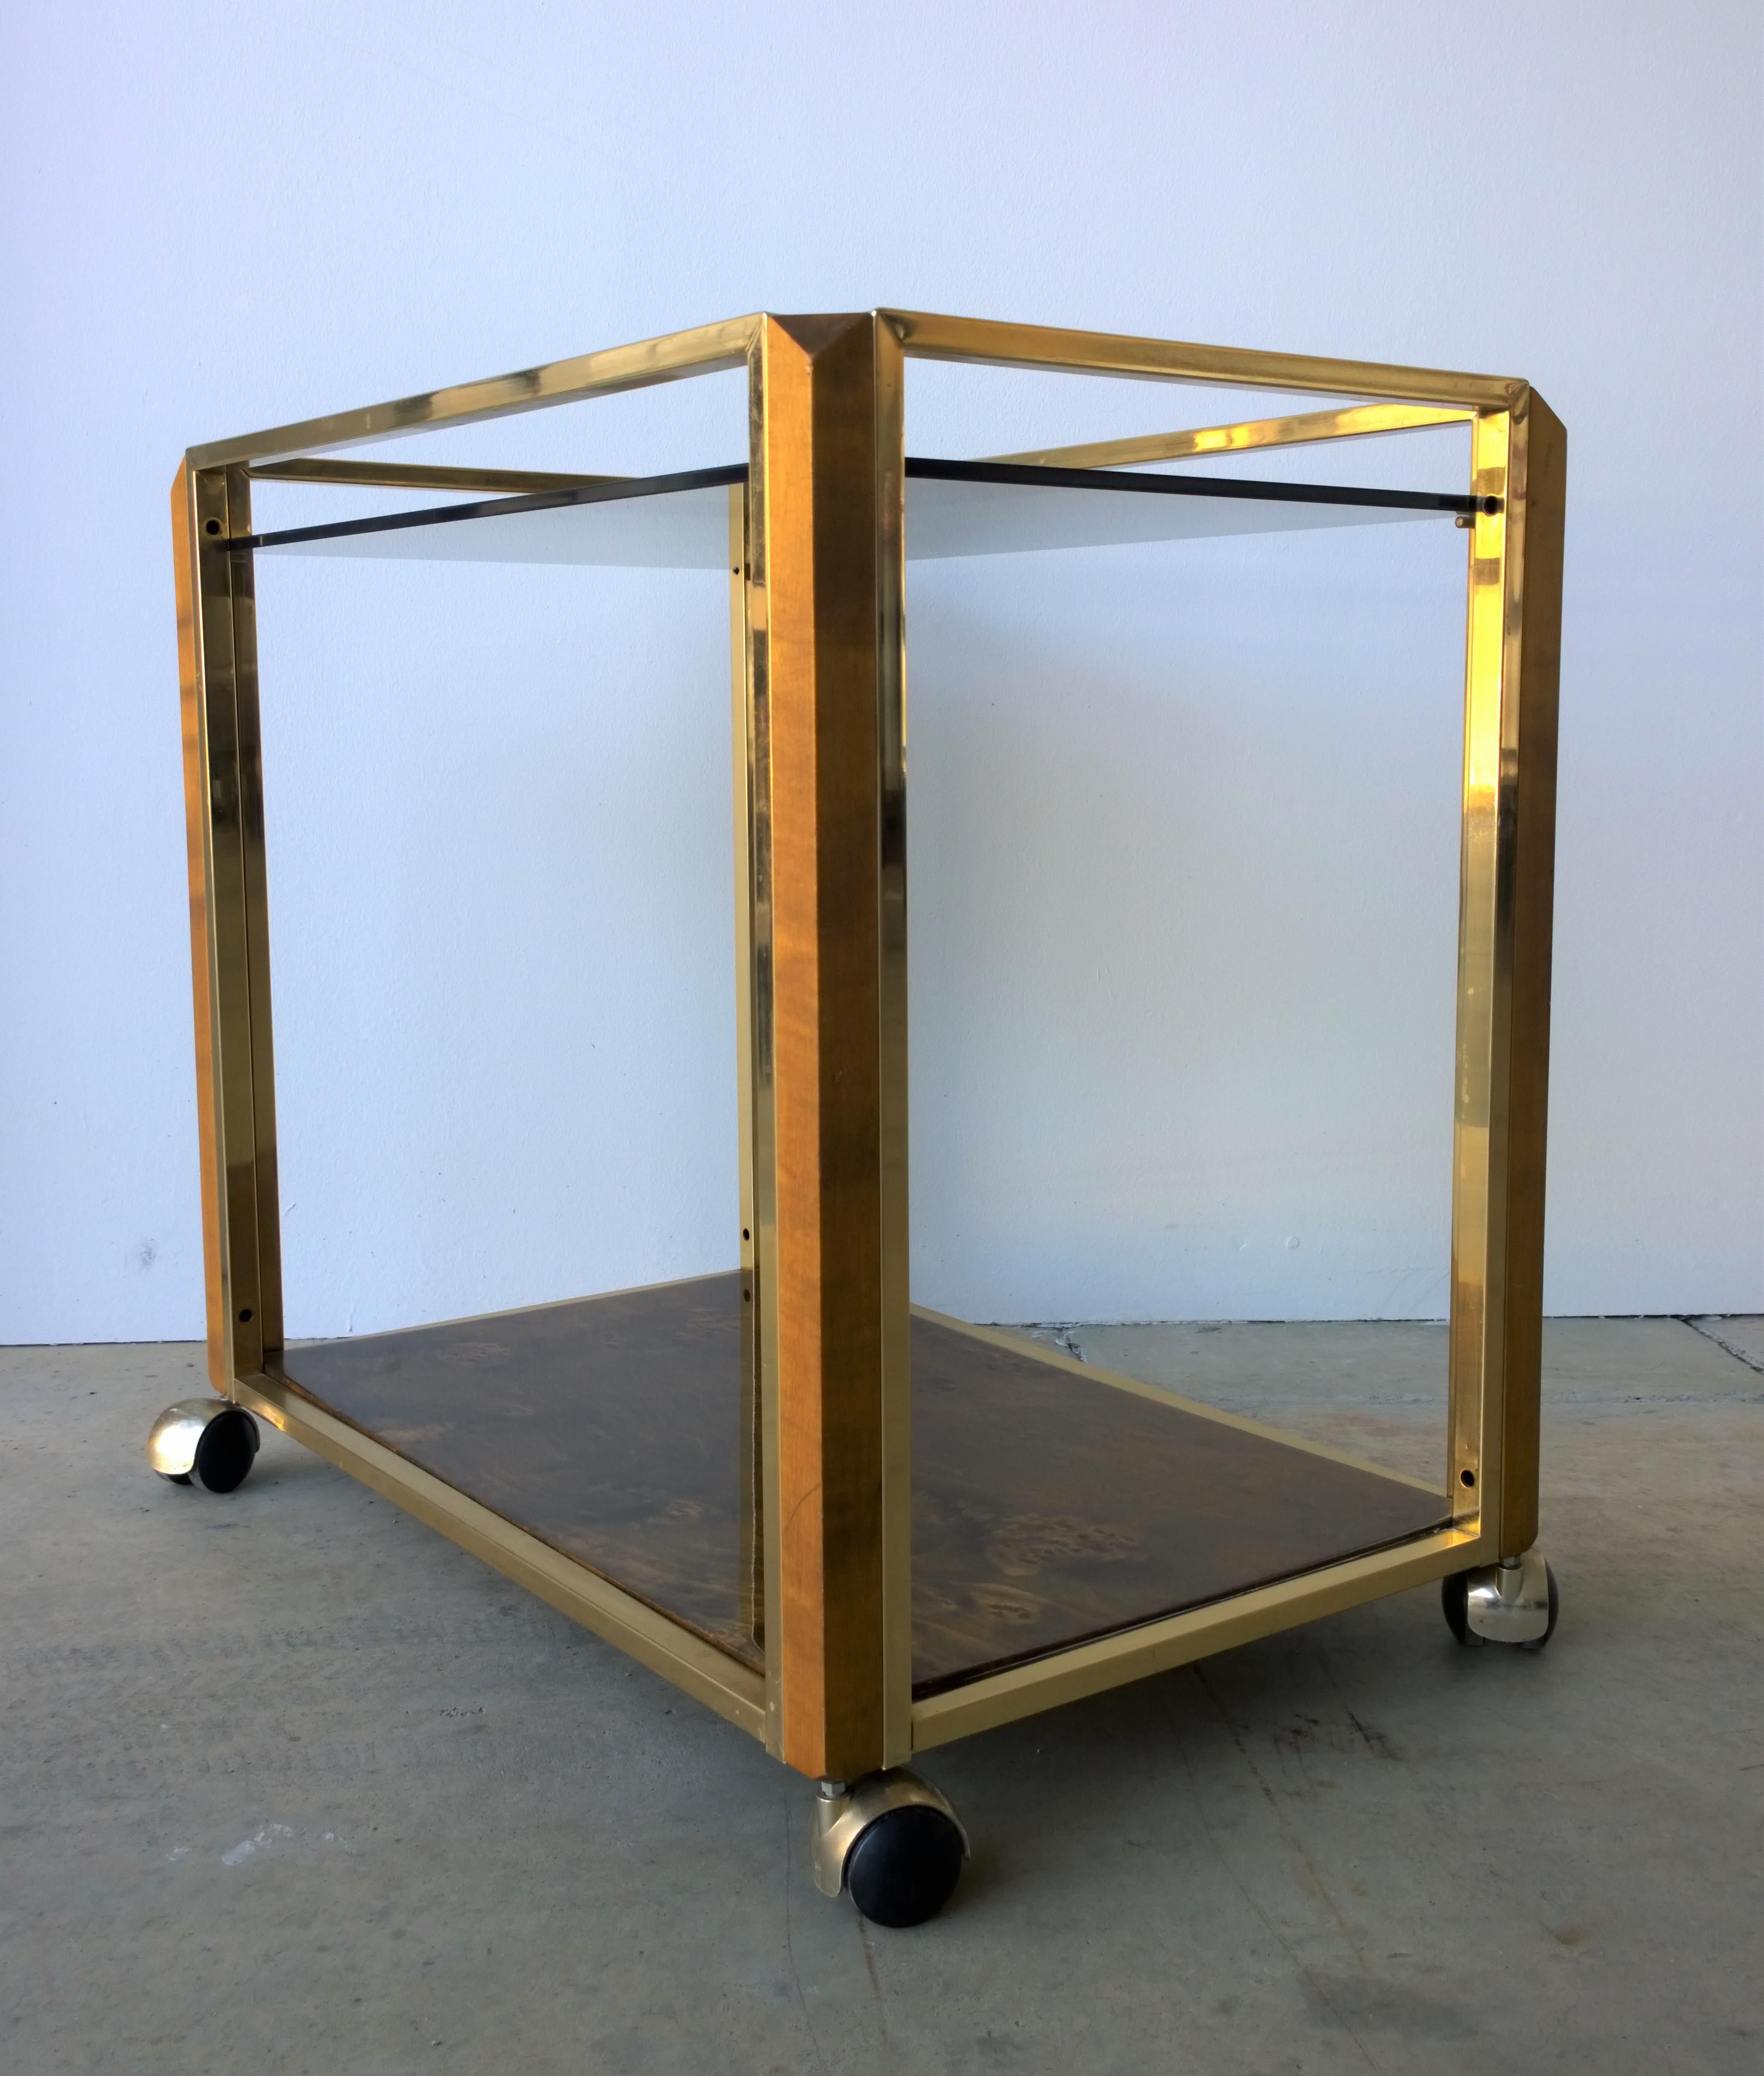 Offered is a Mid-Century Modern Pierre Carding style lacquered brass, wood, glass and clear lacquered burled wood veneer bar or drinks cart. This piece is quite elegant and would fit easily with any type of decor. We suggest requesting additional